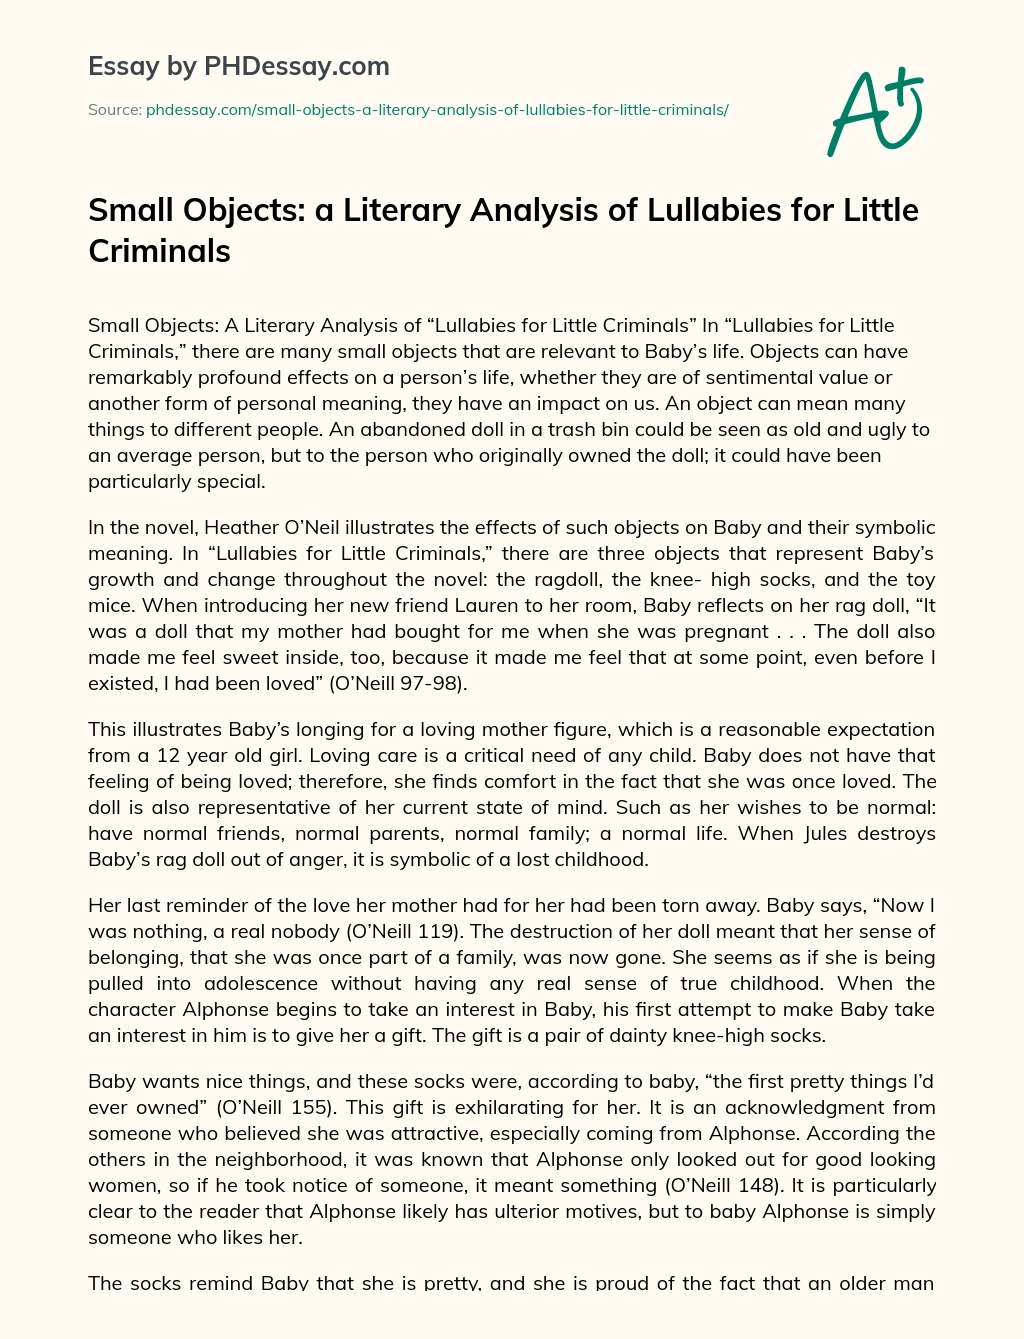 Small Objects: a Literary Analysis of Lullabies for Little Criminals essay